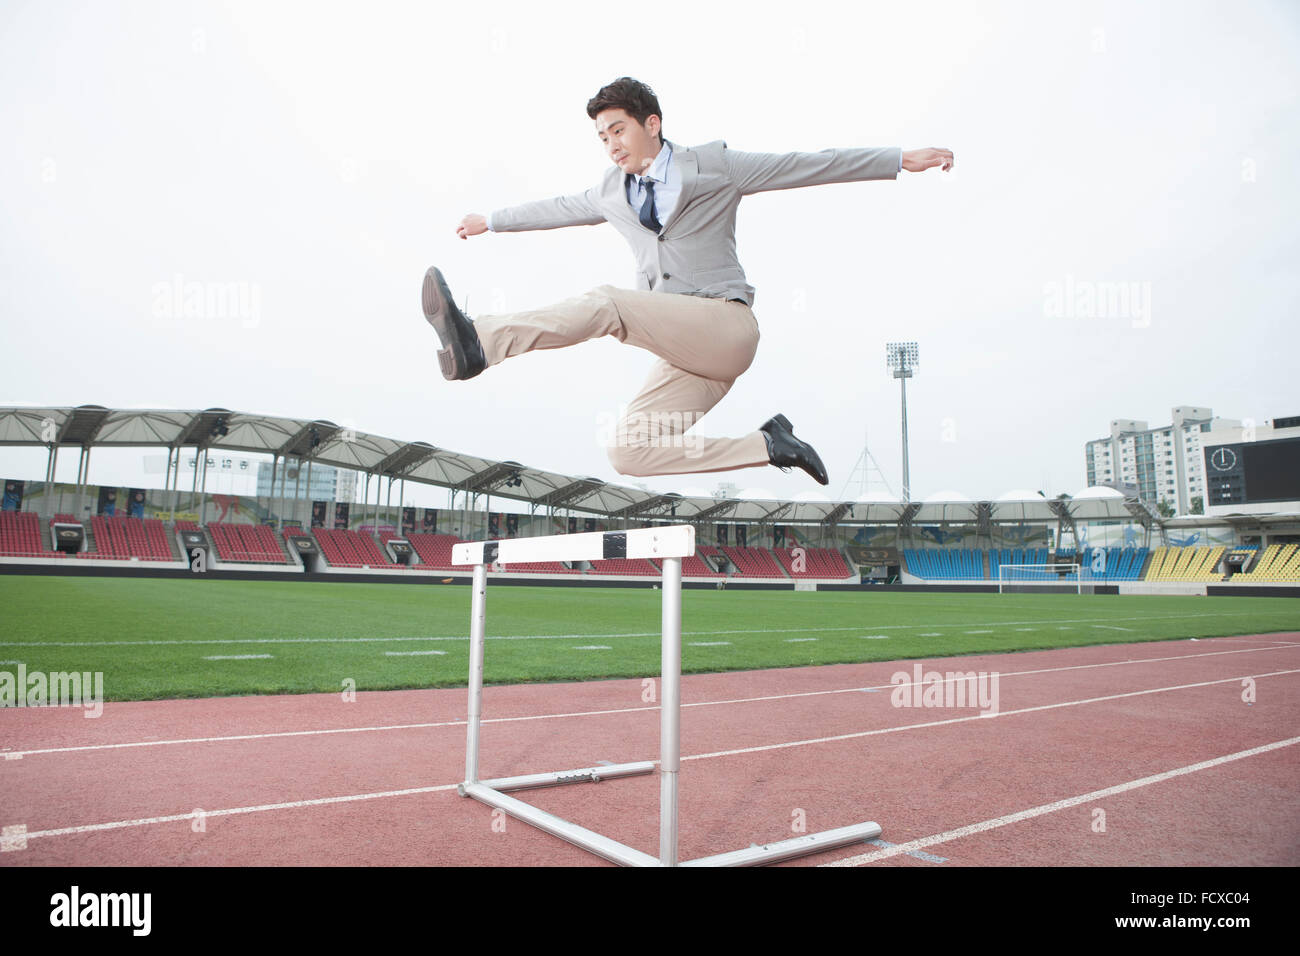 Man in business wear jumping over hurdles on a a track Stock Photo